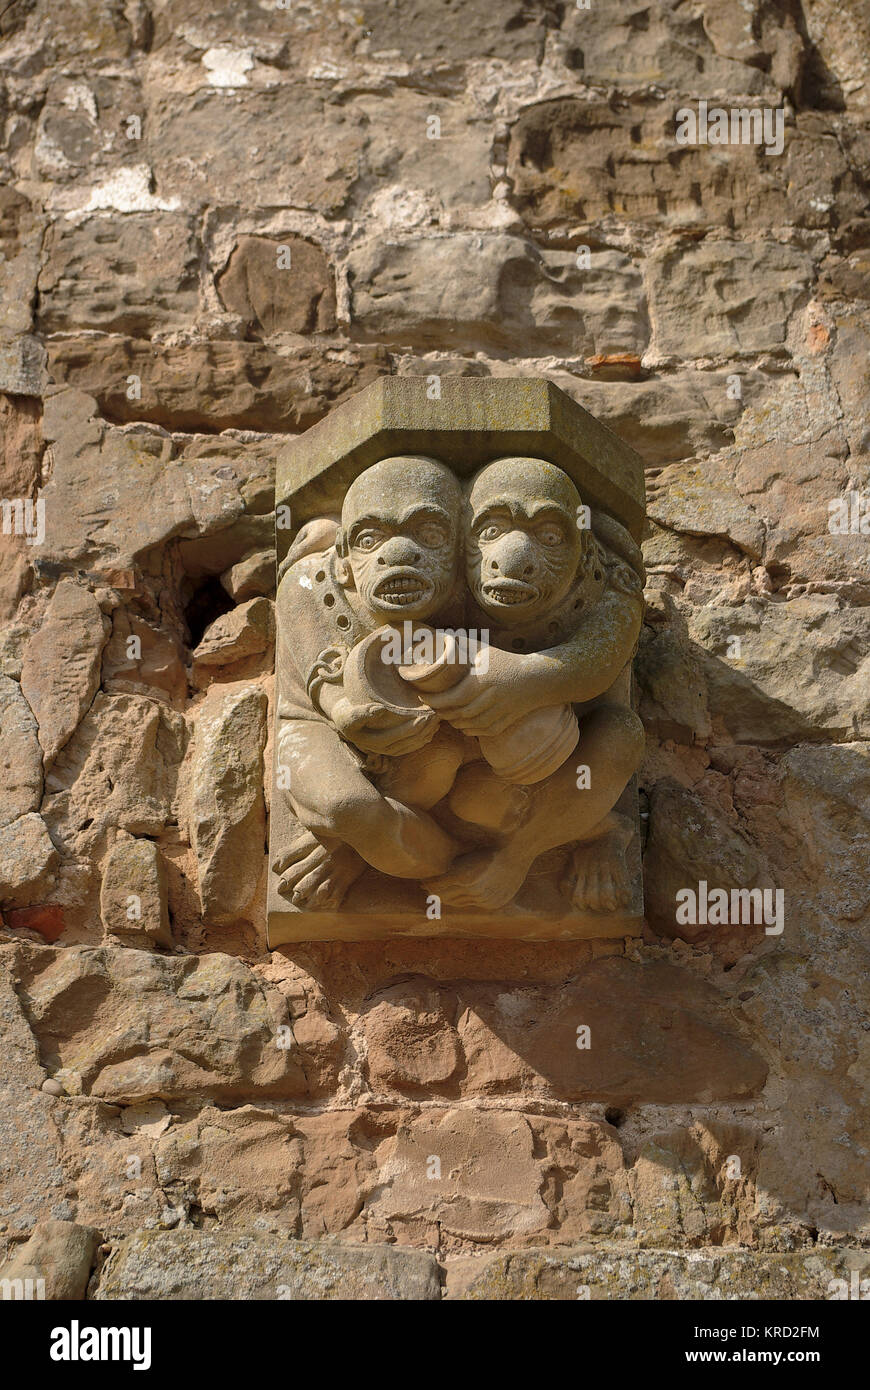 Close-up of gargoyles at Rufford Hall, Nottingham, showing two grotesque human figures huddled together.       Date: circa 2004 Stock Photo